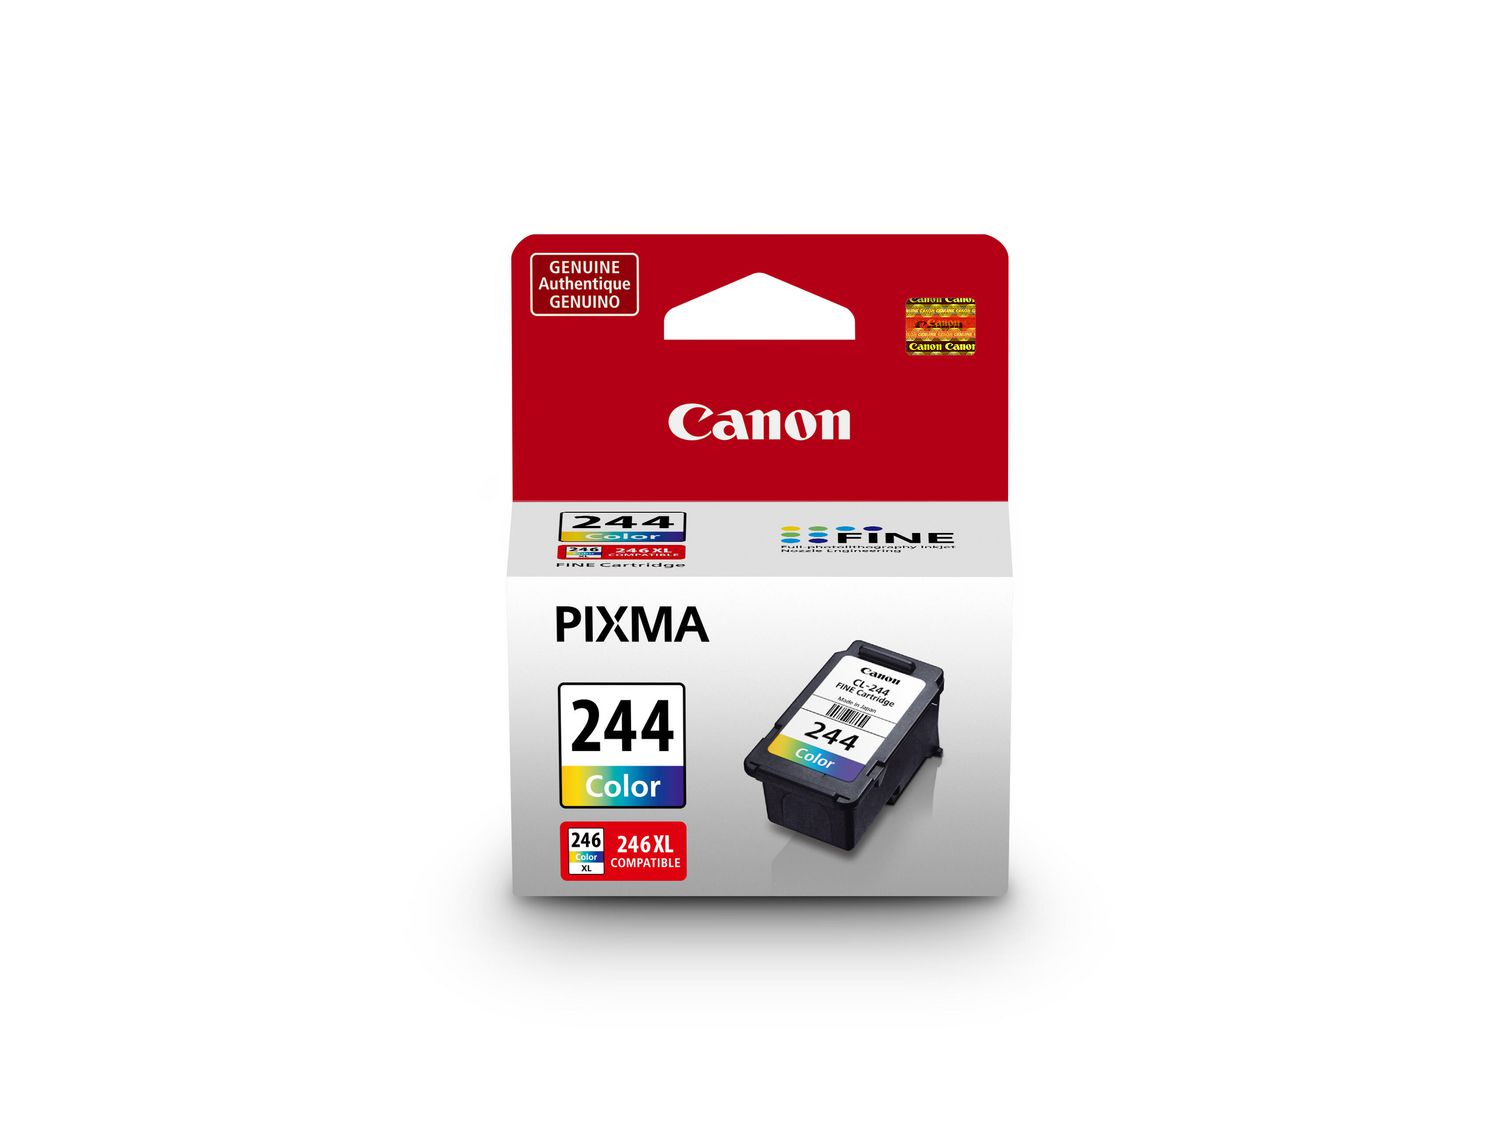 Canon 244. Cartridge Color Canon big all in one. 446 Кэнон цвета. Картридж canon cl 446